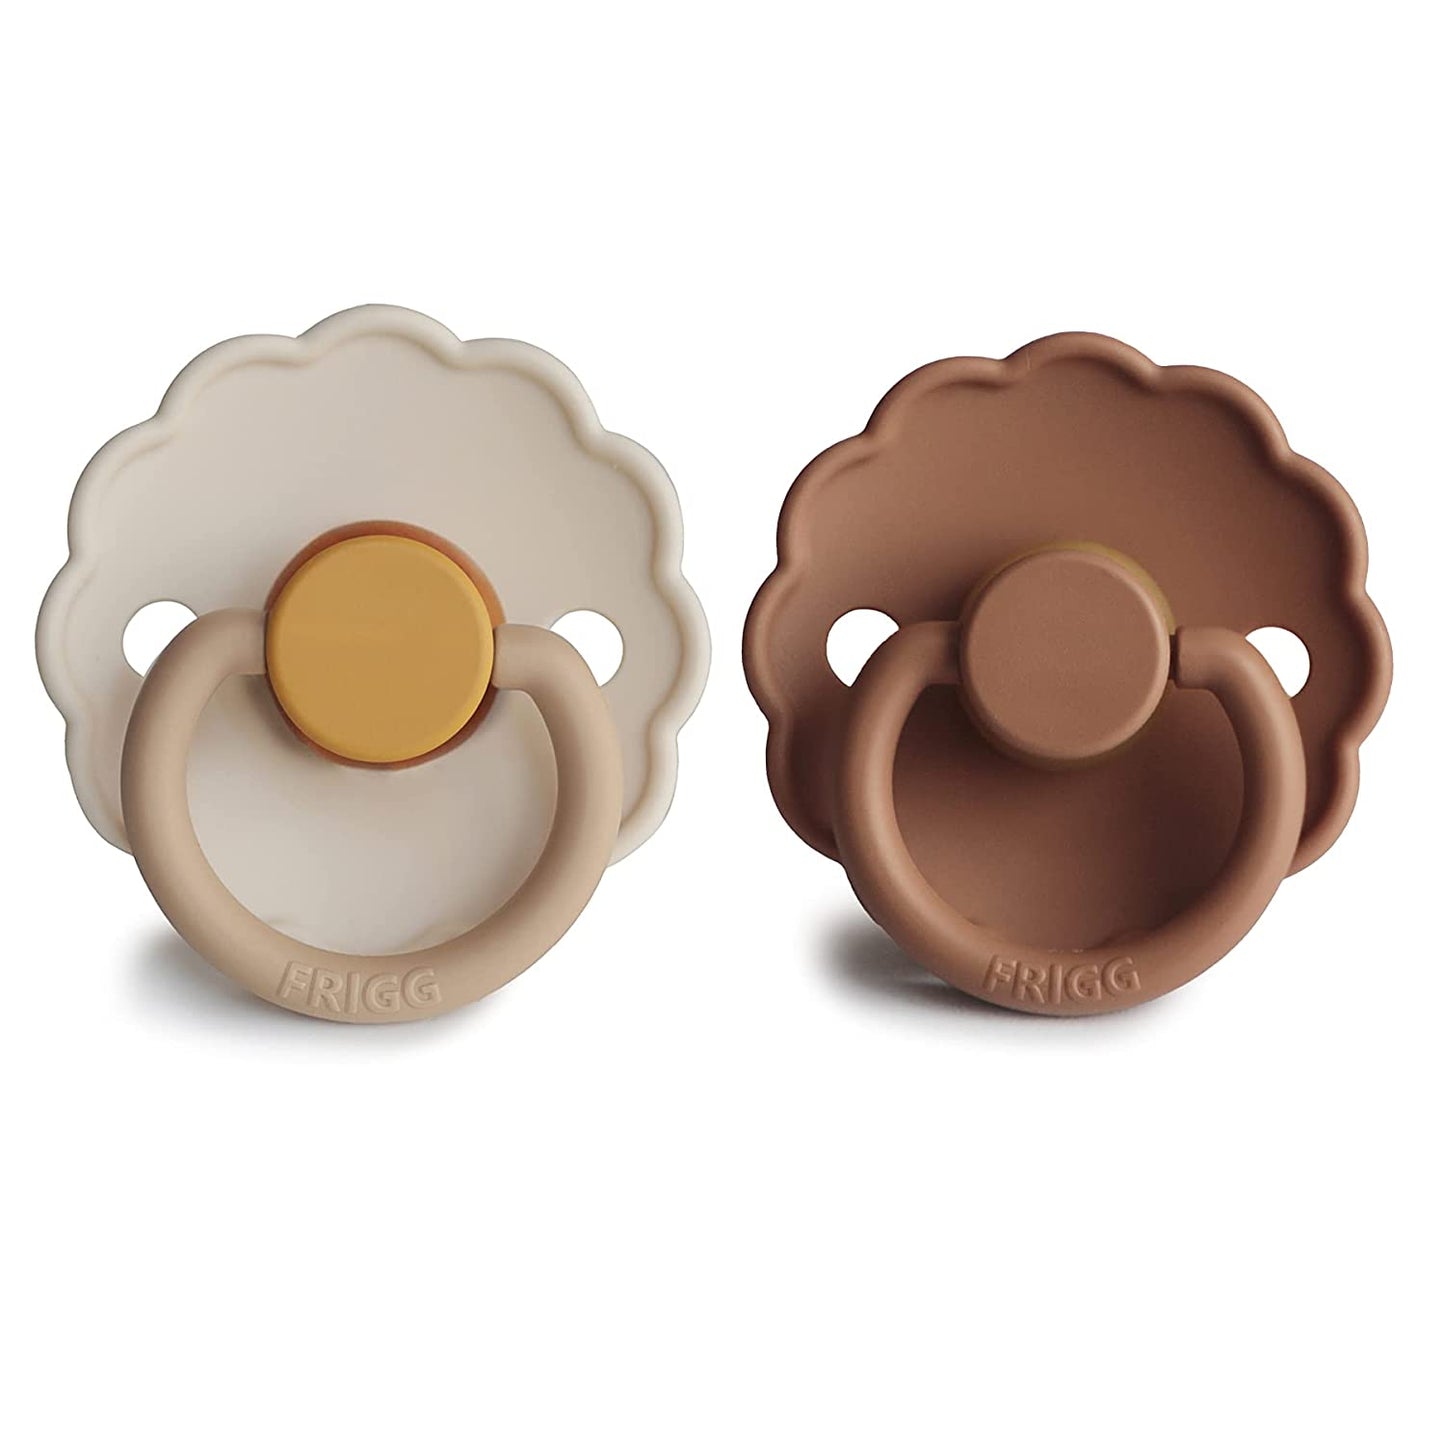 FRIGG Daisy Natural Rubber Pacifier - 2-Pack - Chamomile / Peach Bronze